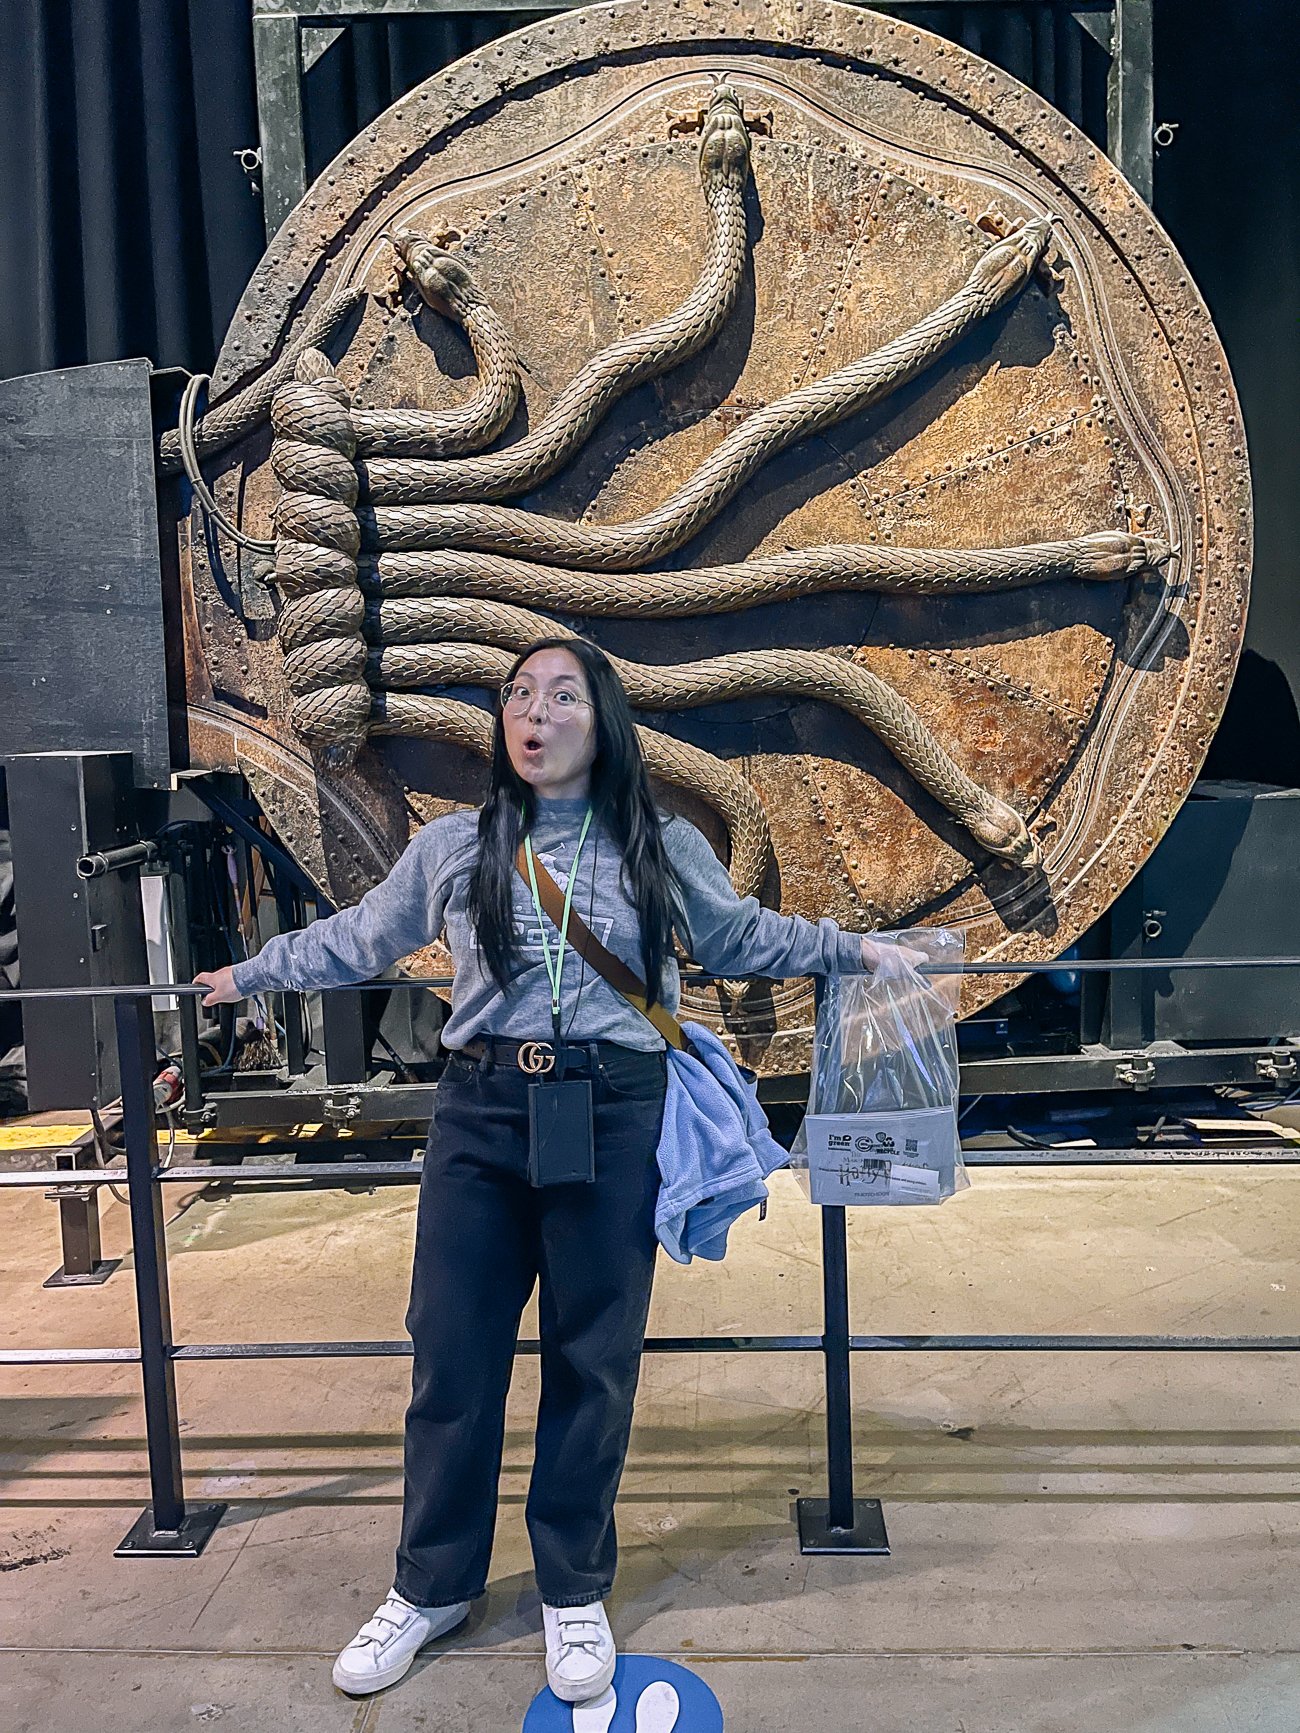 Kaitlin looking surprised in front of the door to the Chamber of Secrets with 6 snakes